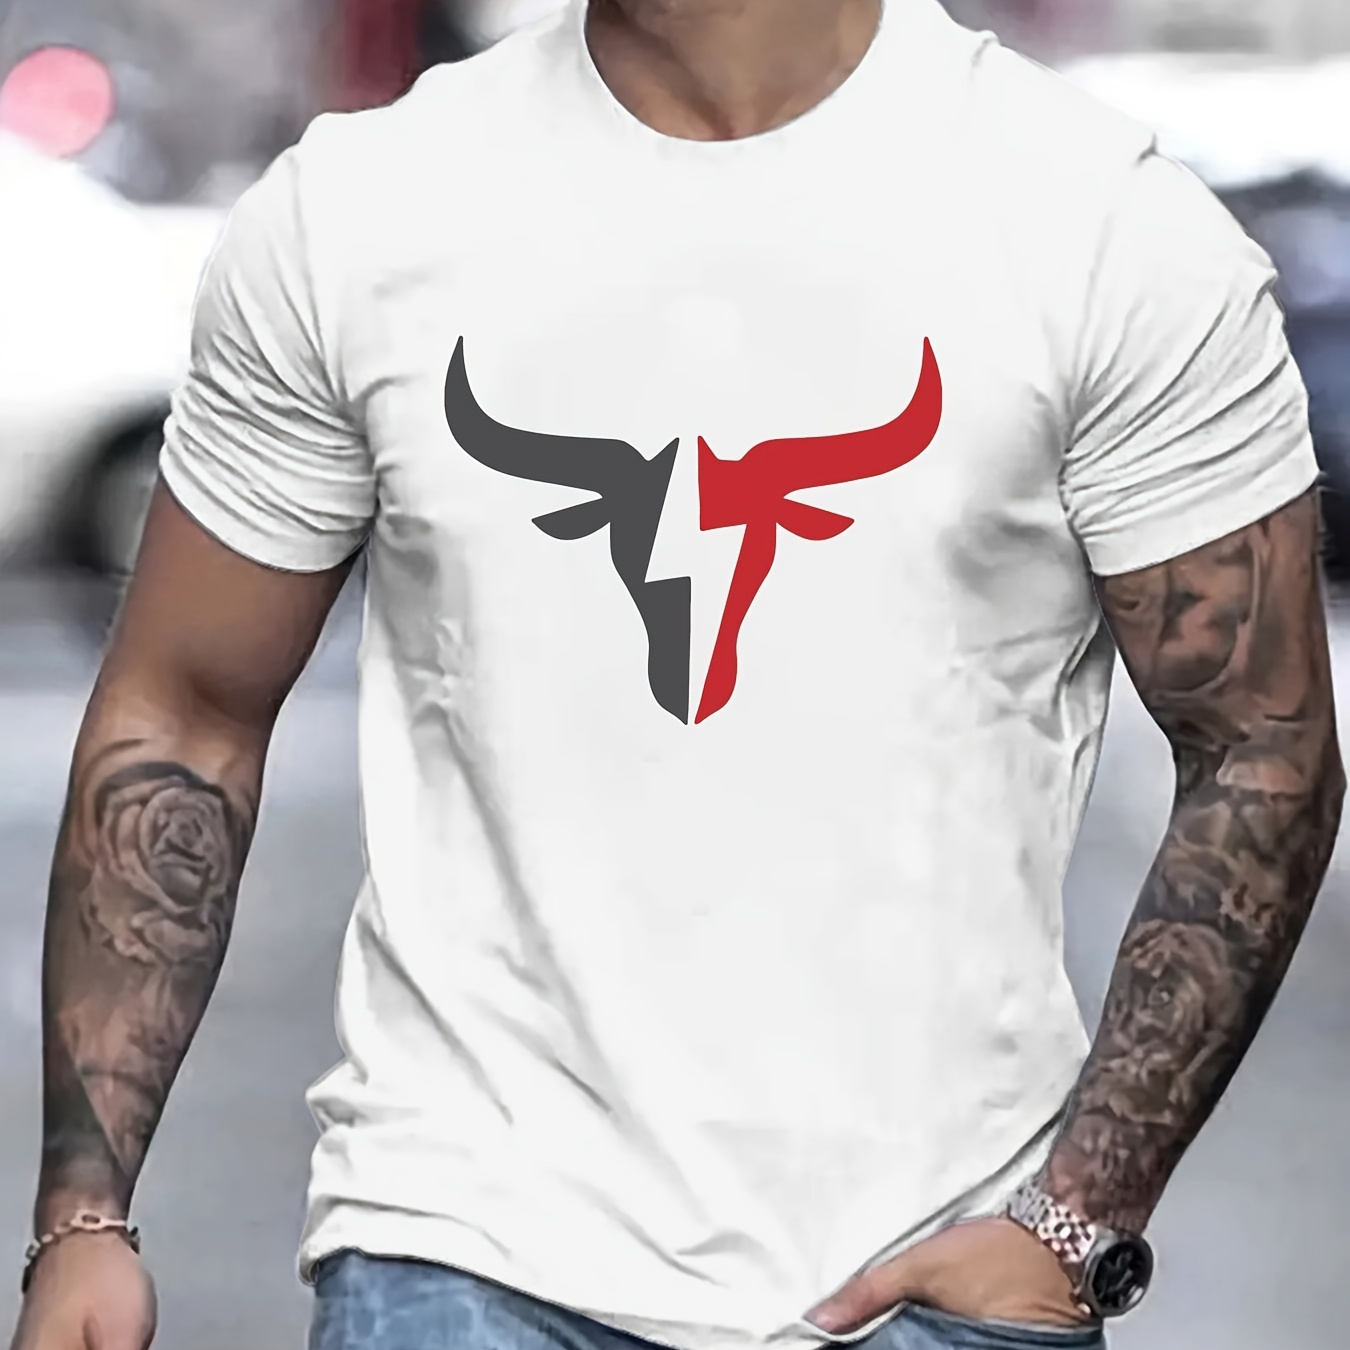 

Bull Head Print Men's Round Neck Short Sleeve Tee Fashion Regular Fit T-shirt Top For Spring Summer Holiday